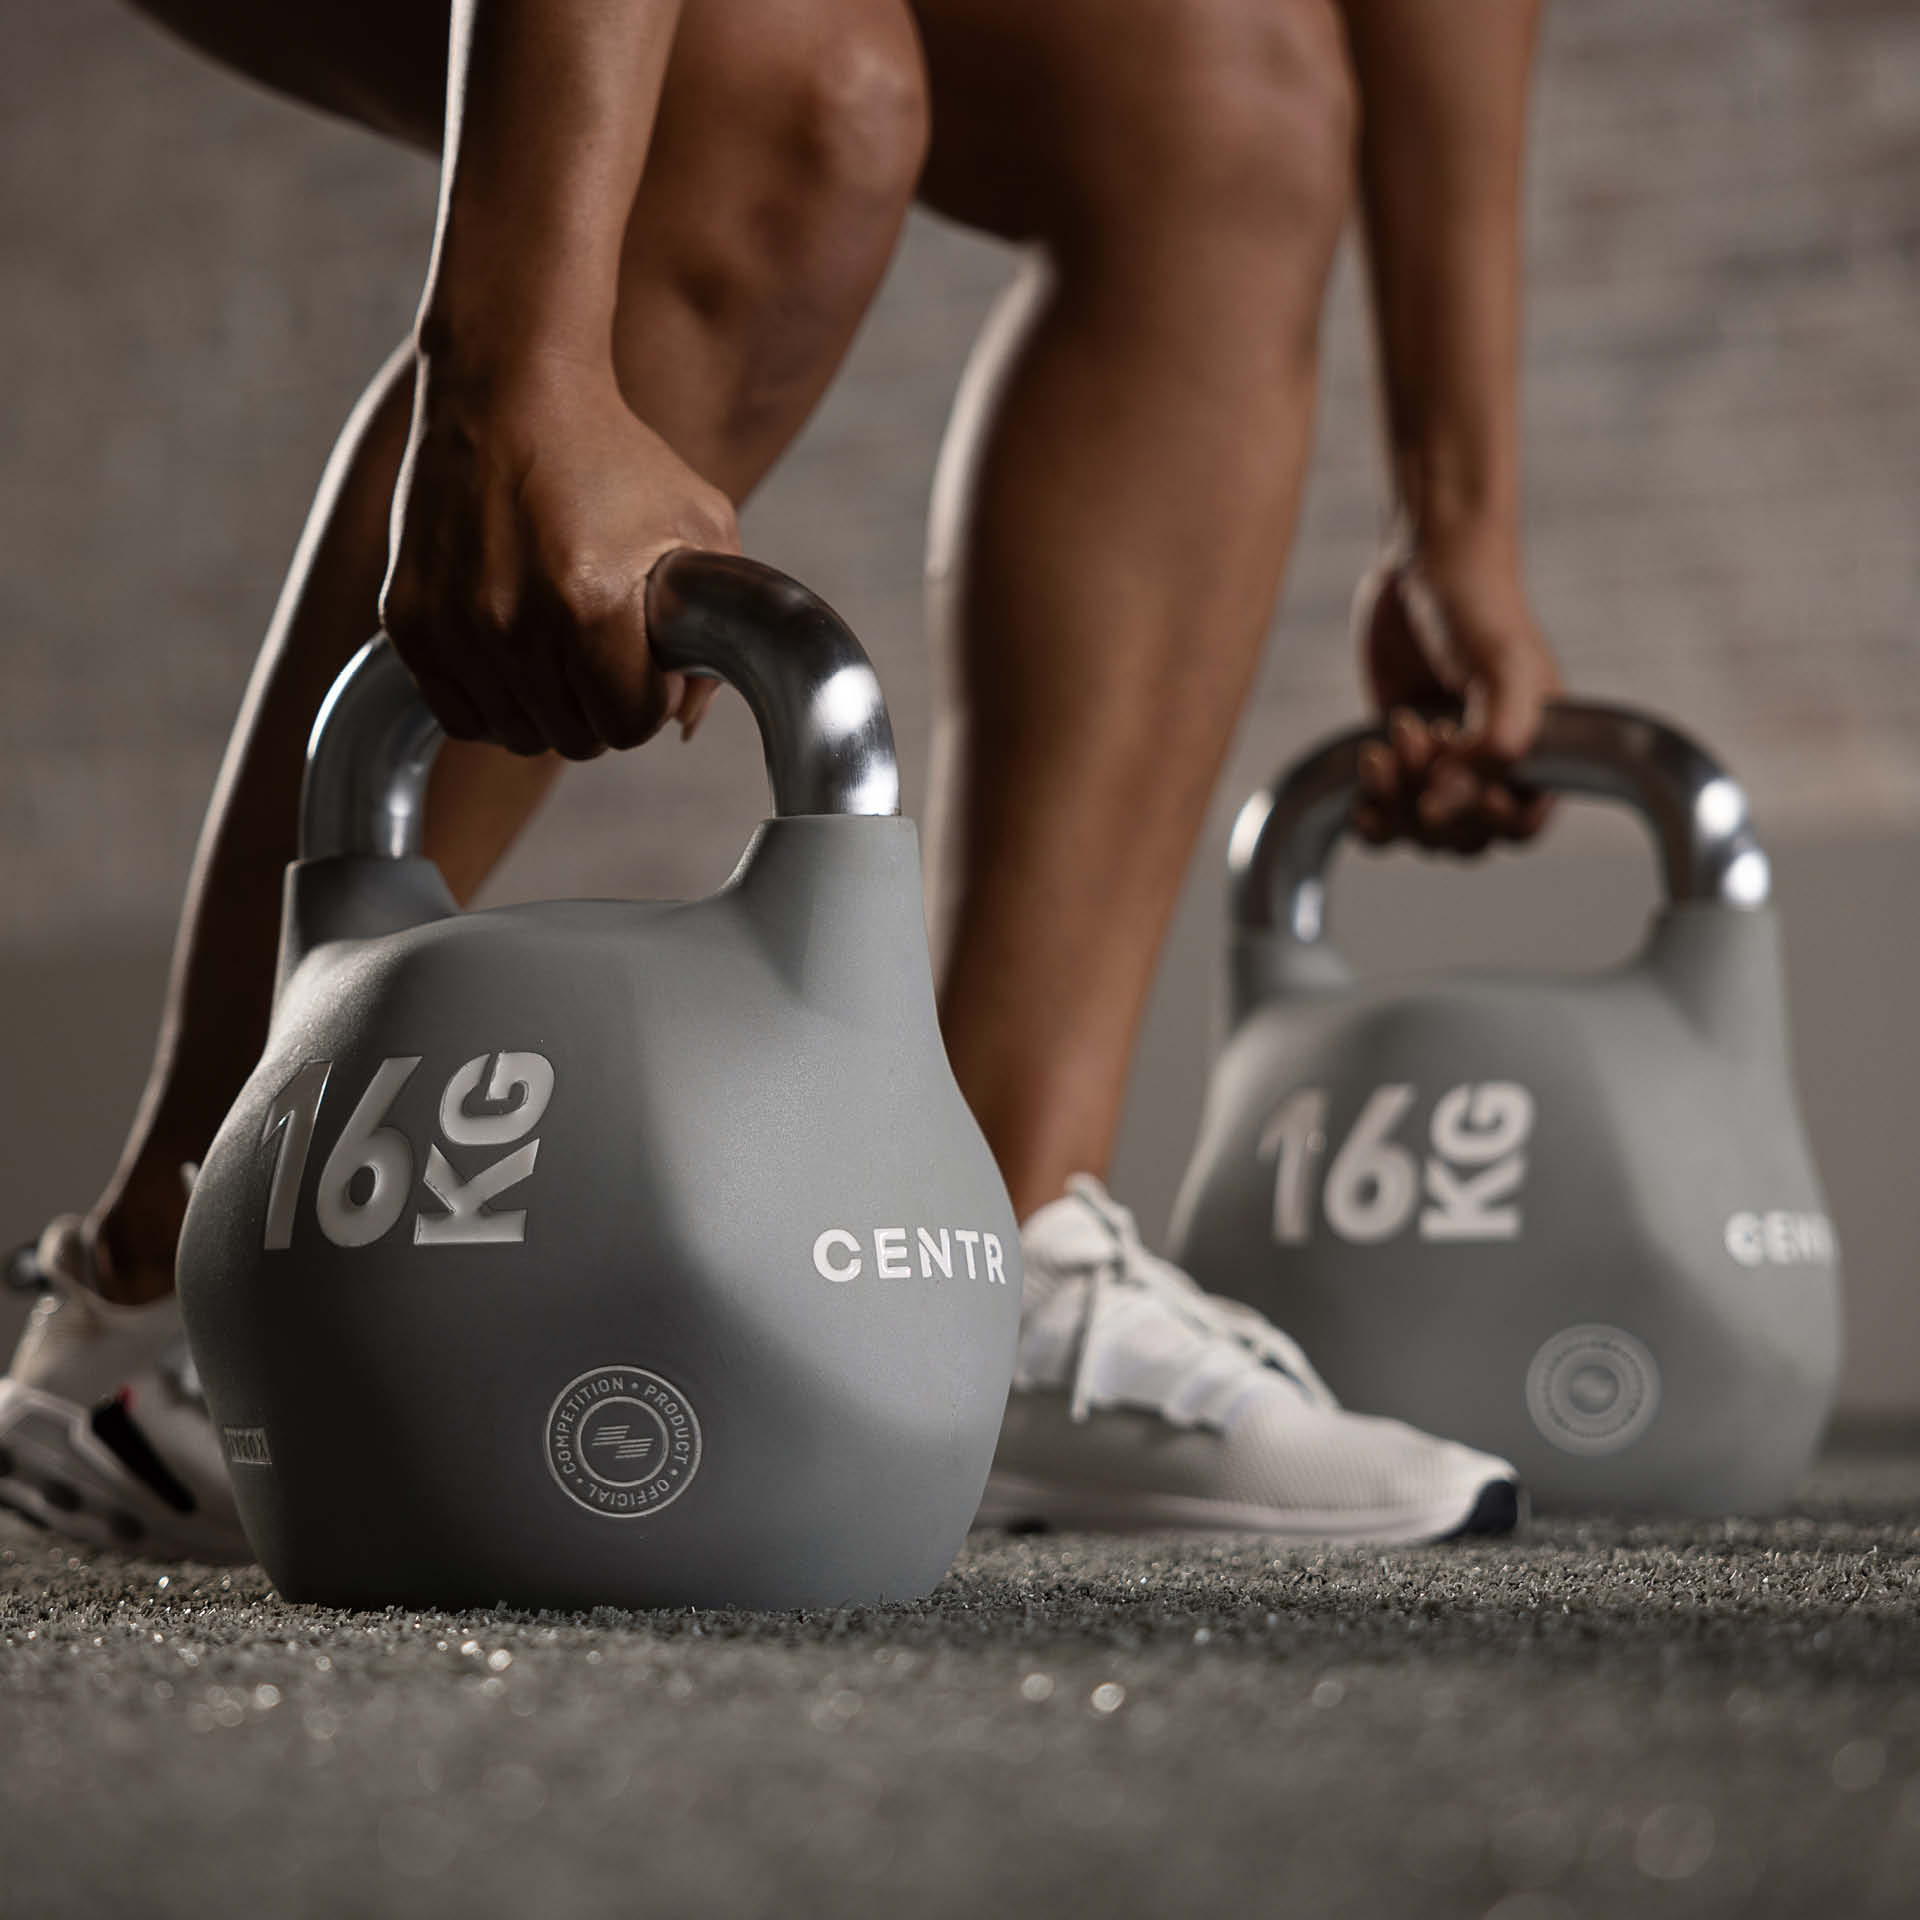 CENTR x HYROX Competition Octo Kettlebell 16 kg